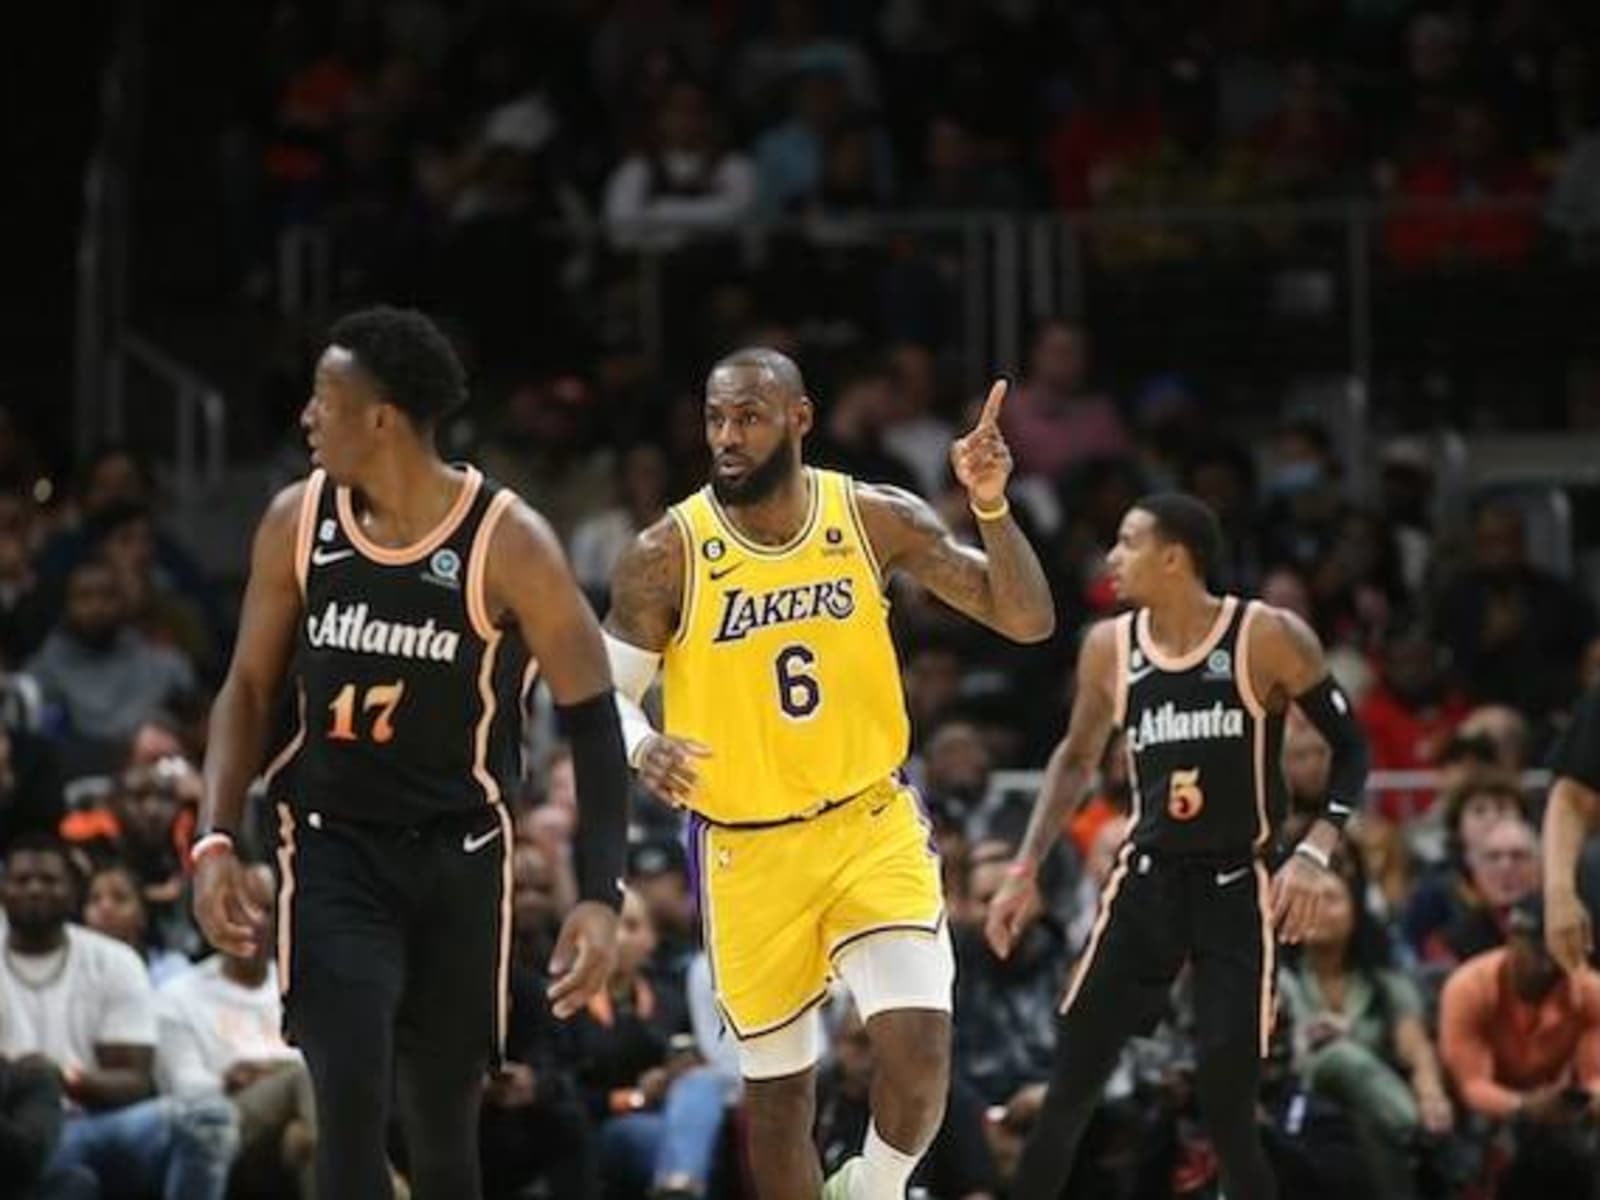 LeBron James scores 47 points on 38th birthday in Lakers' win